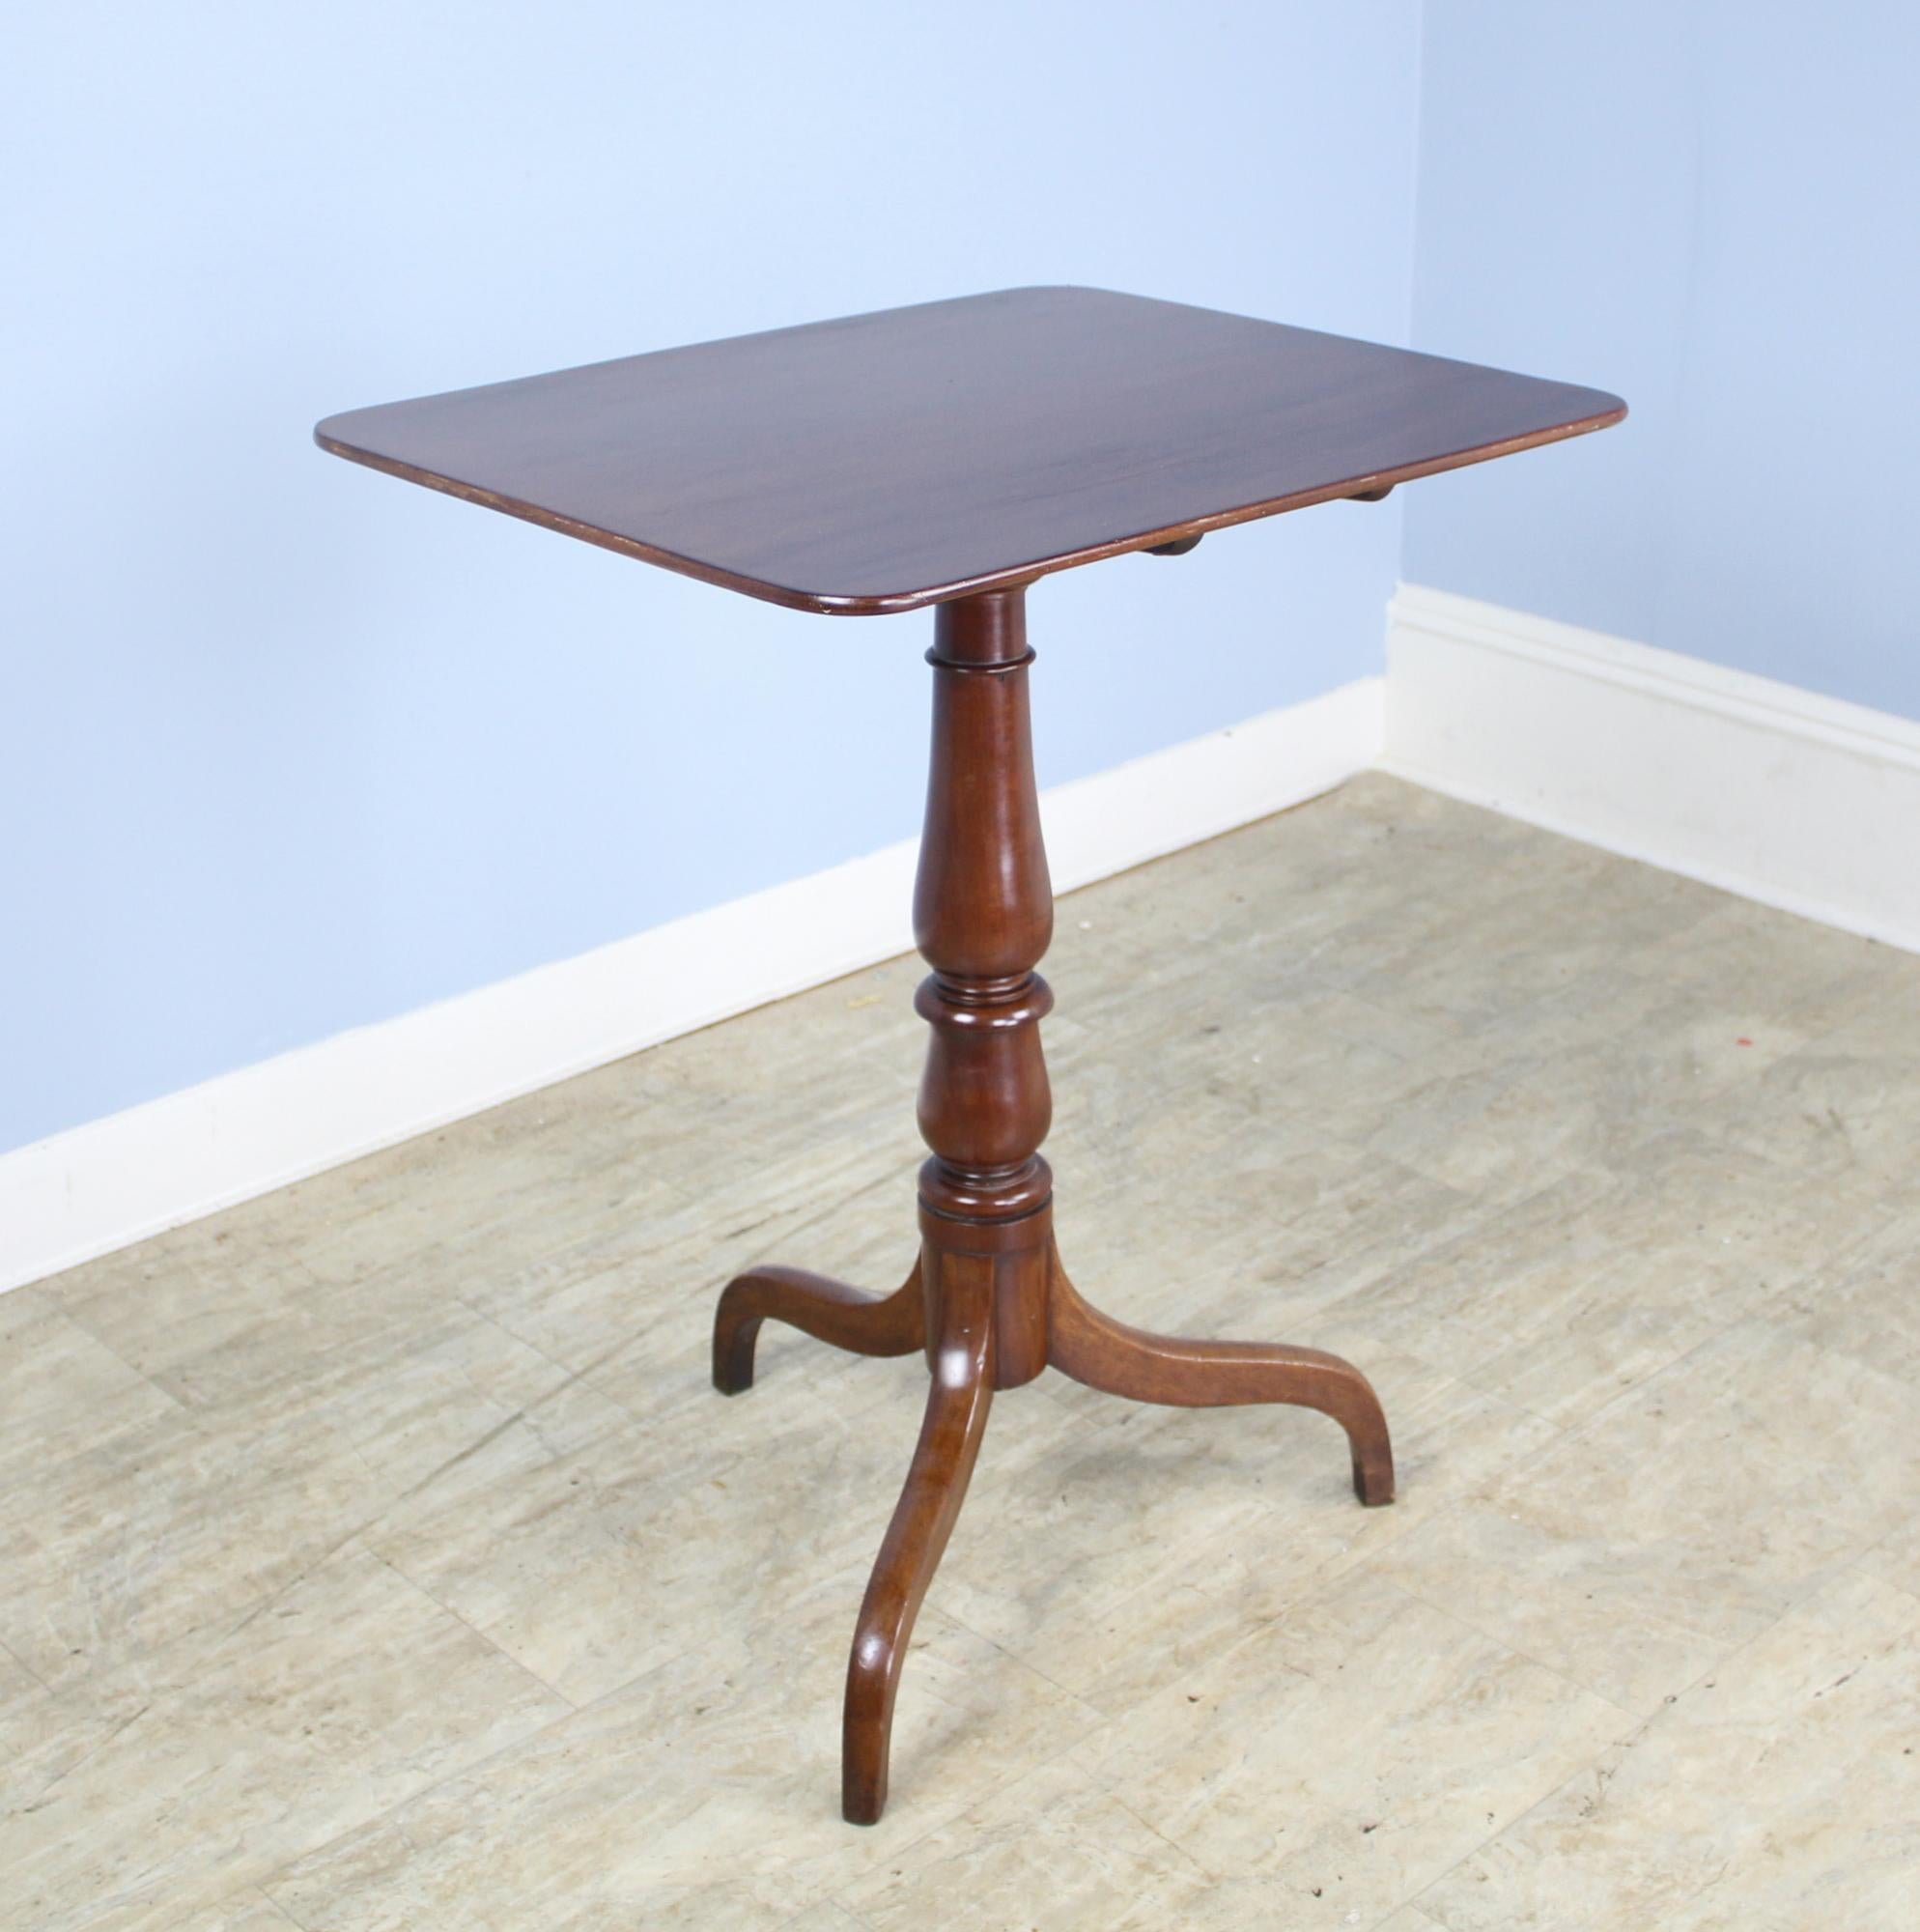 A refined and elegant tilt-top mahogany occasional table, quite early. Both the tabletop and the tilting mechanism are in very good antique condition, the top having received a light refinishing. The tripod base is sturdy and has a nice color and